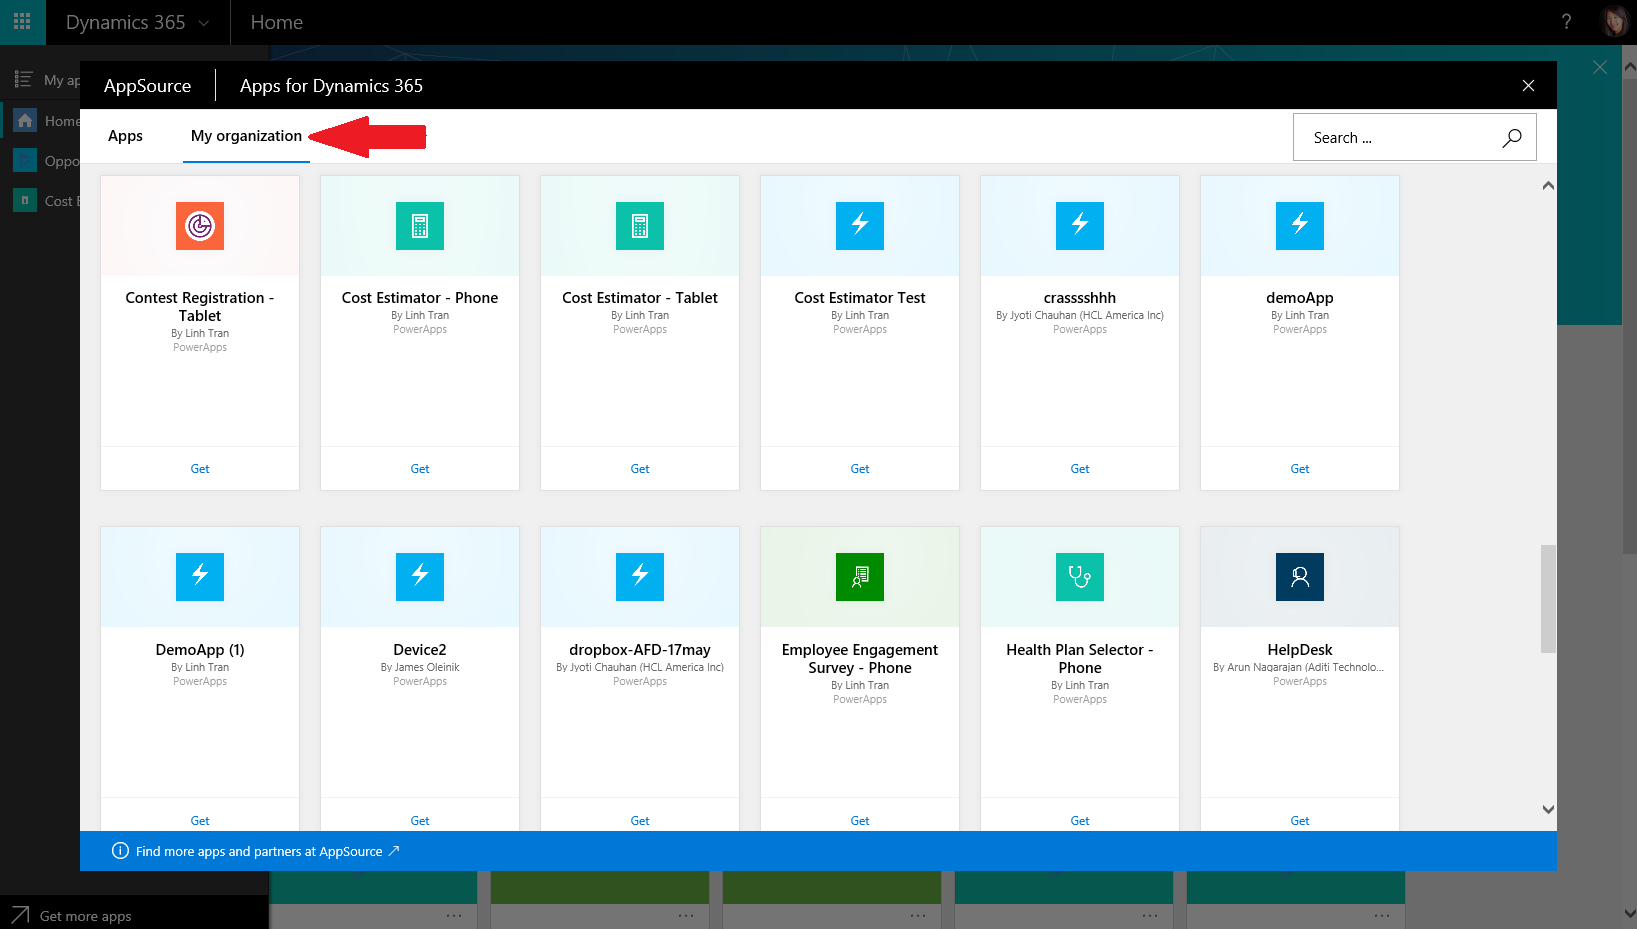 Apps on Dynamics 365.